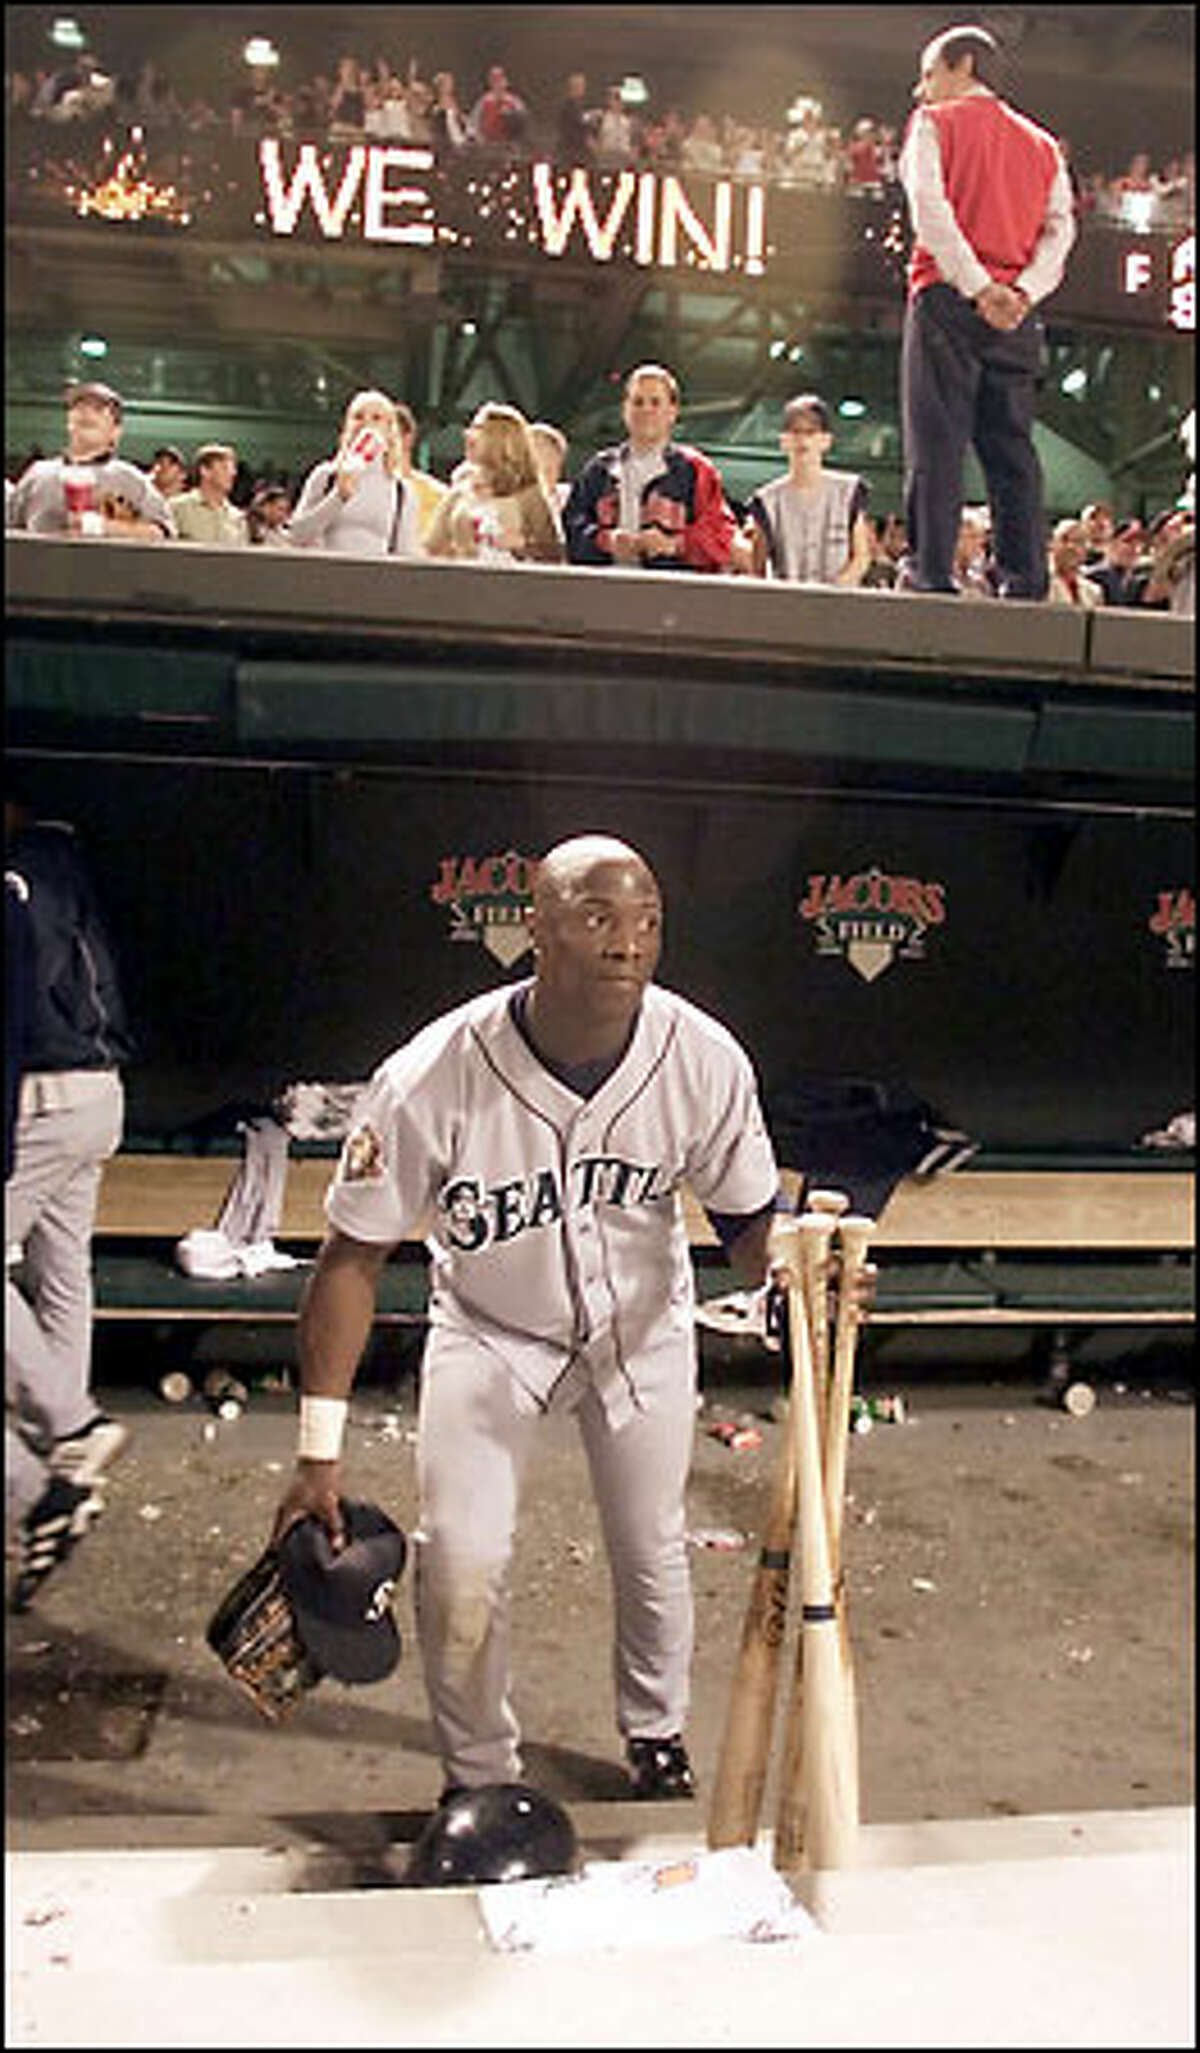 Mike Cameron picks up his bats, glove and hat from the dugout after the Mariners' 17-2 loss to the Cleveland Indians.